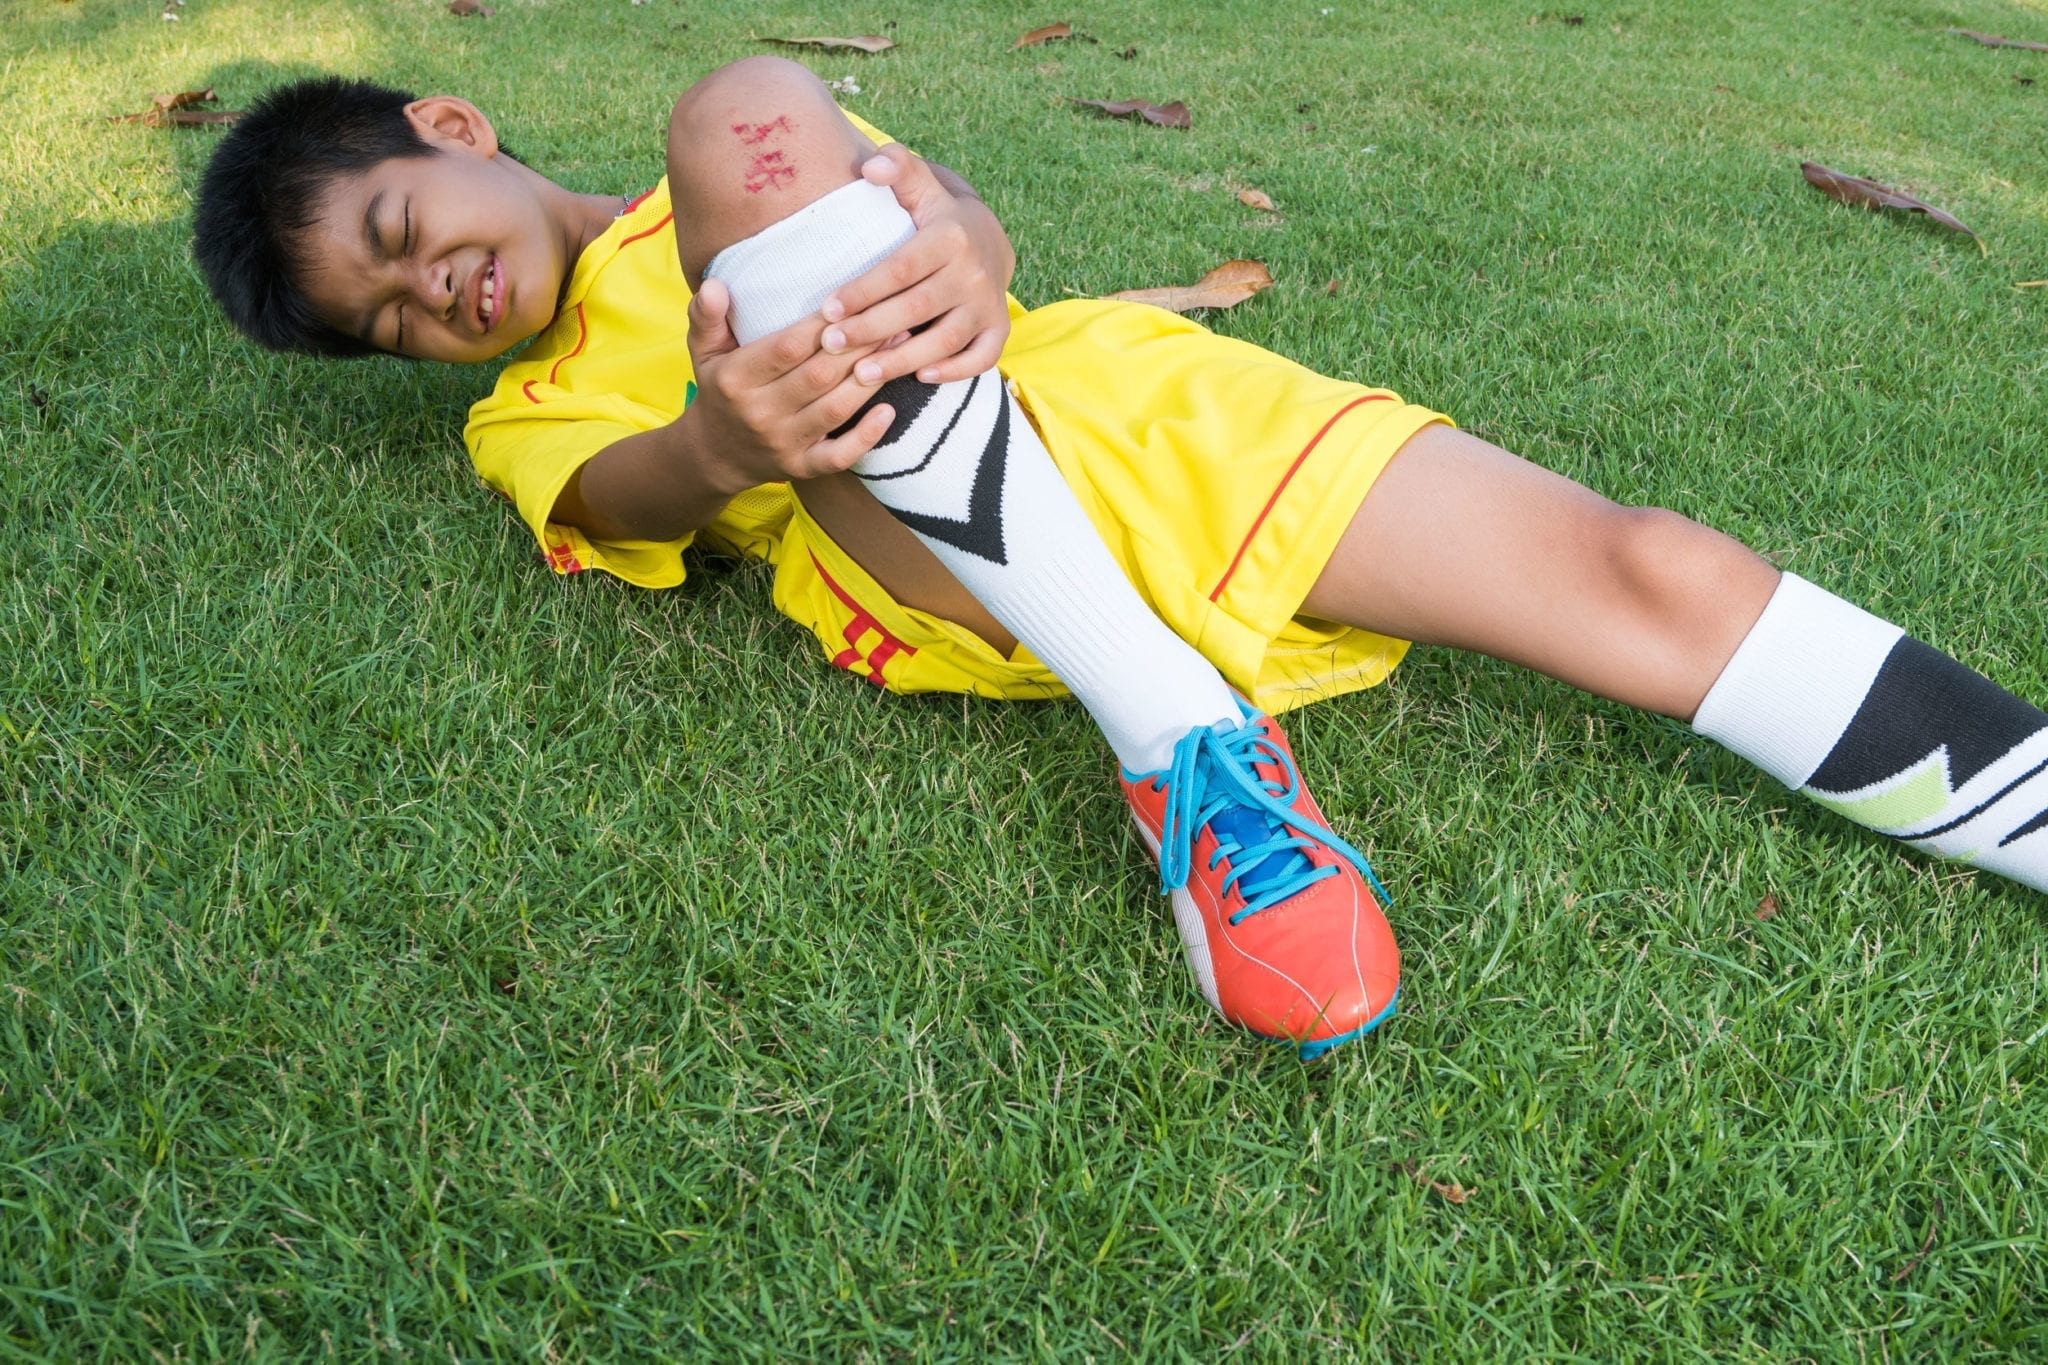 Everything Florida Parents Should Know about Kids' Sports Injuries